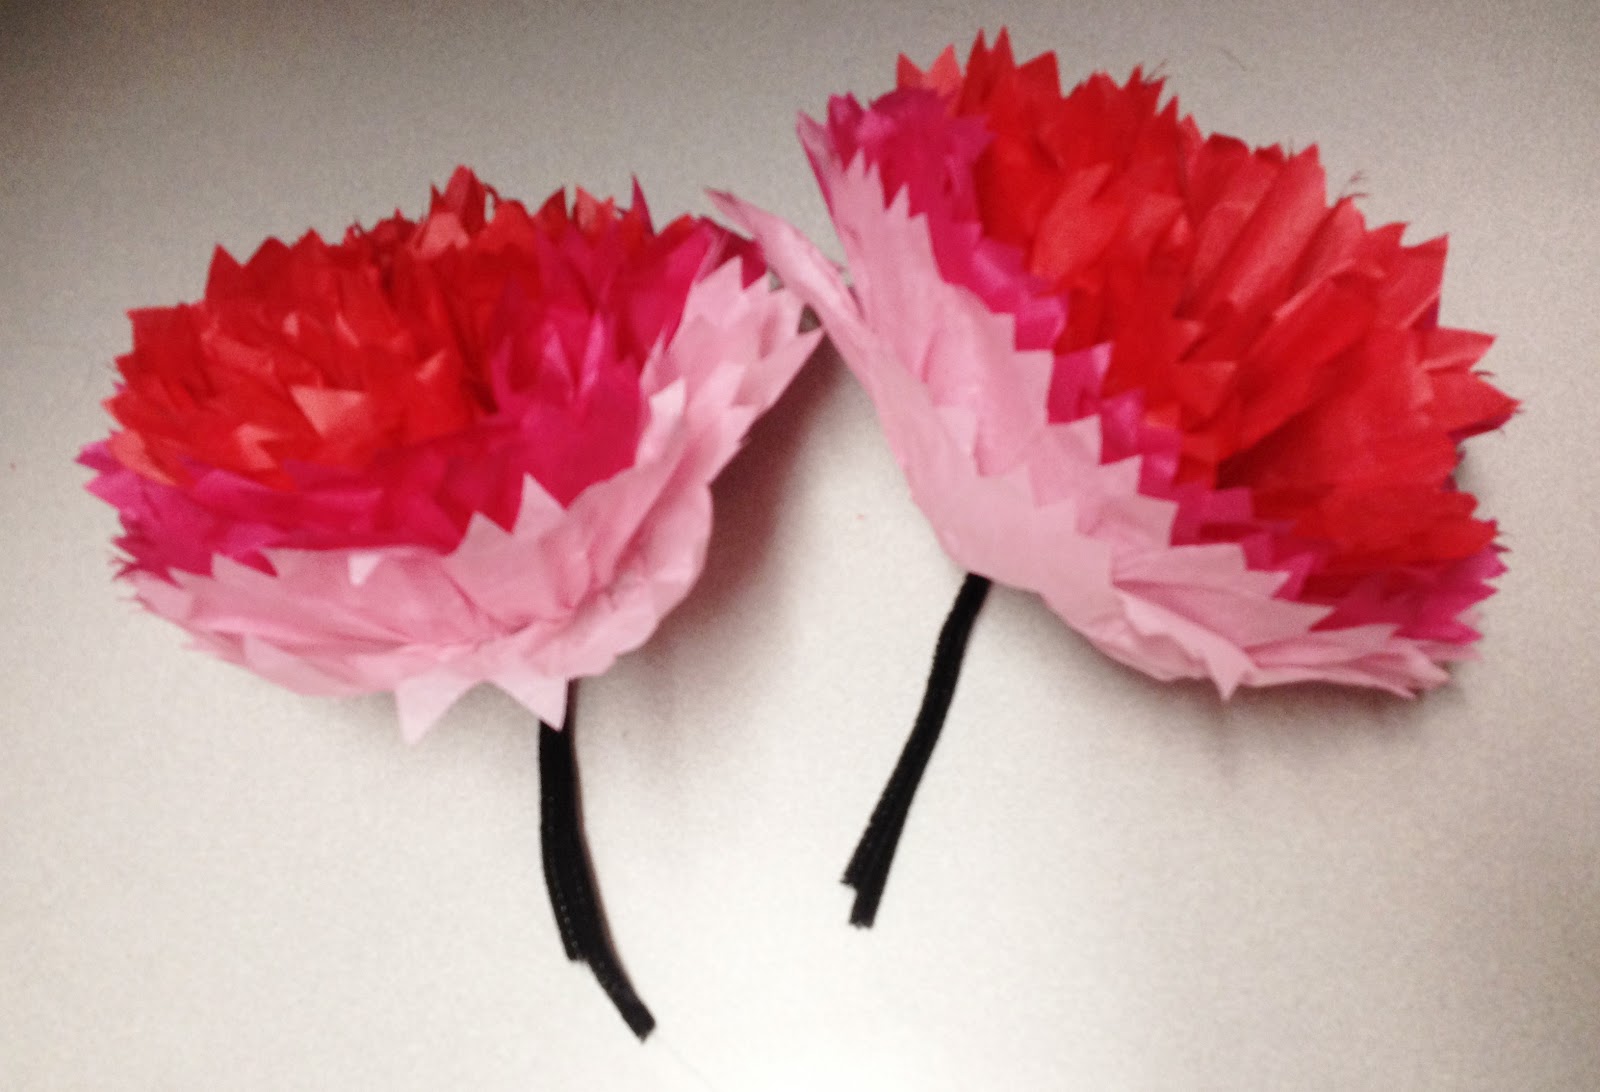 Love and Whimsy: Tissue Paper Flowers